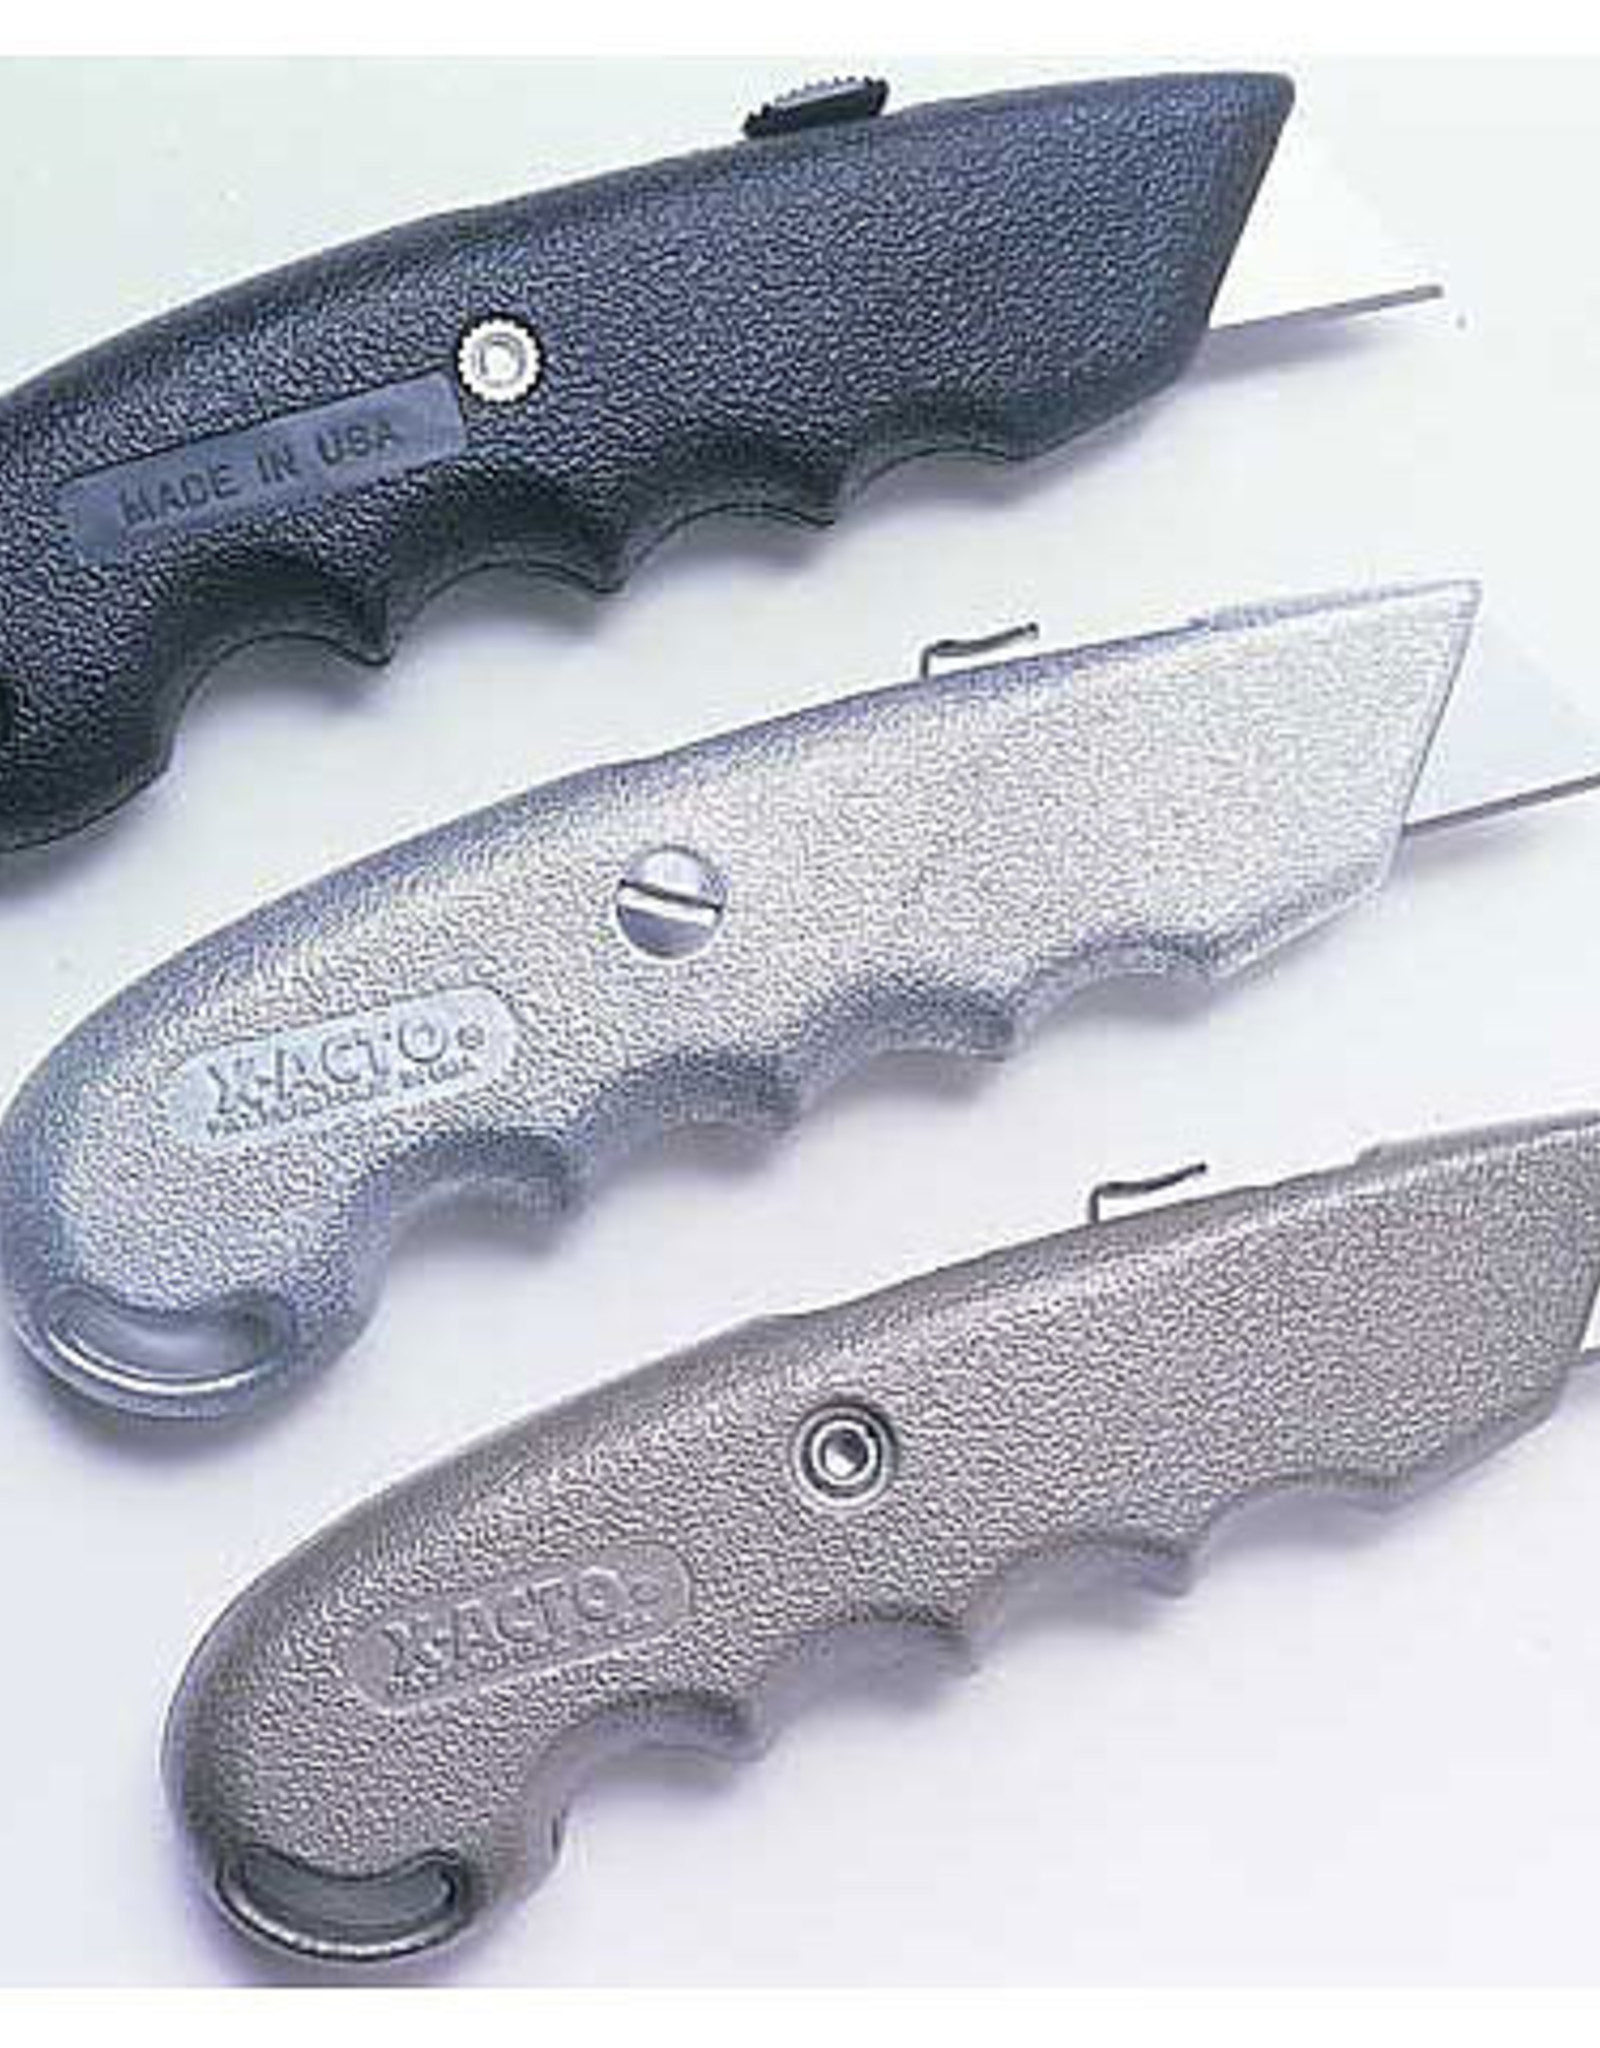 X-Acto Knives & Blades - Anderson Ranch ArtWorks Store